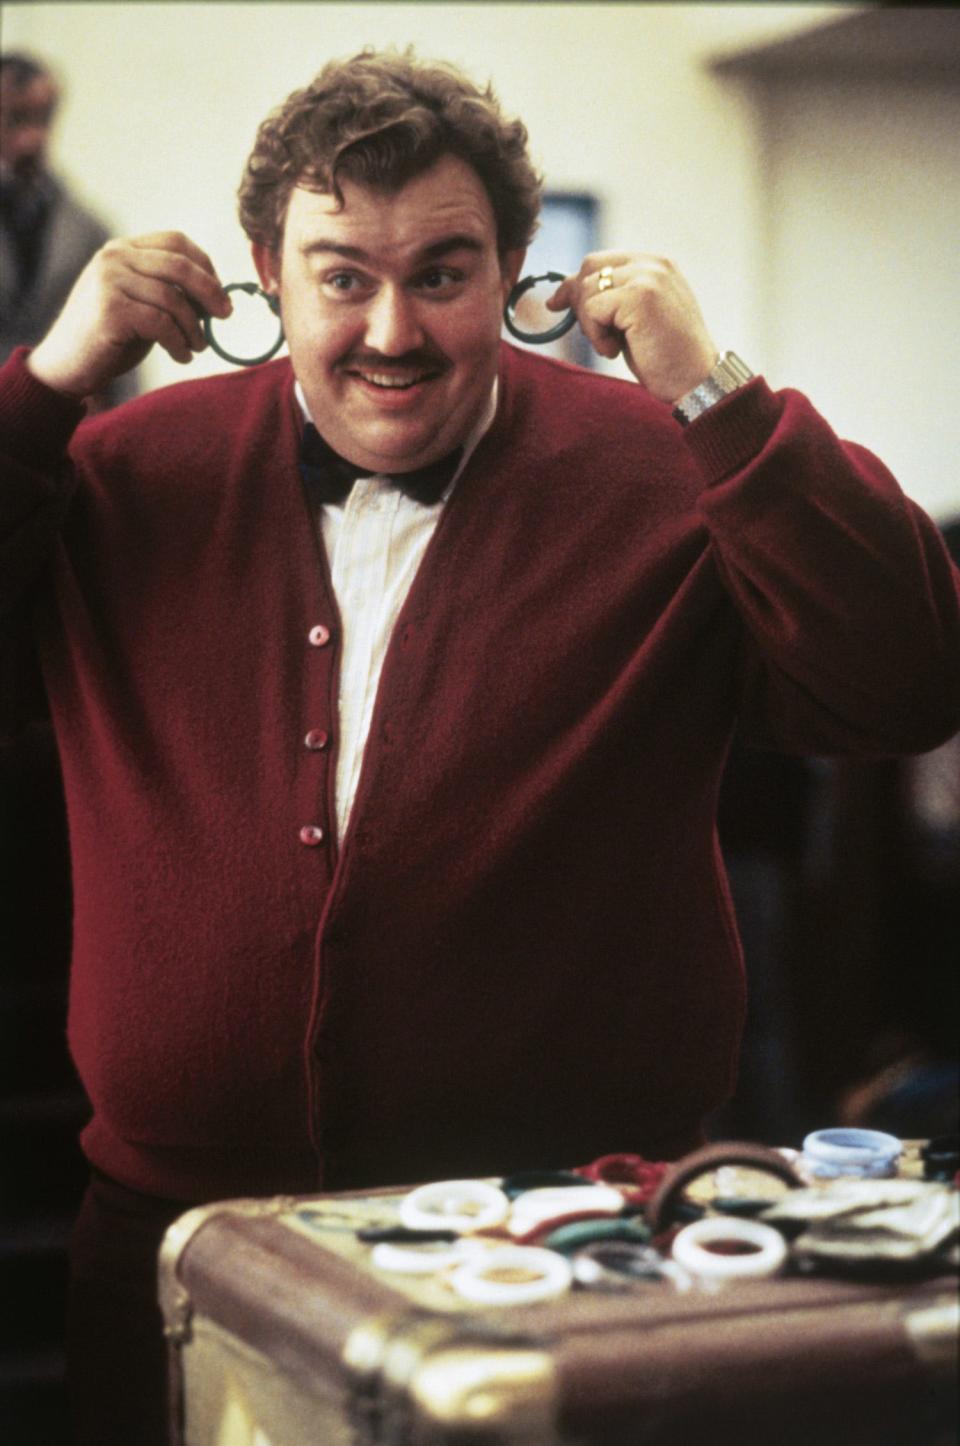 The late John Candy in "Planes, Trains & Automobiles."